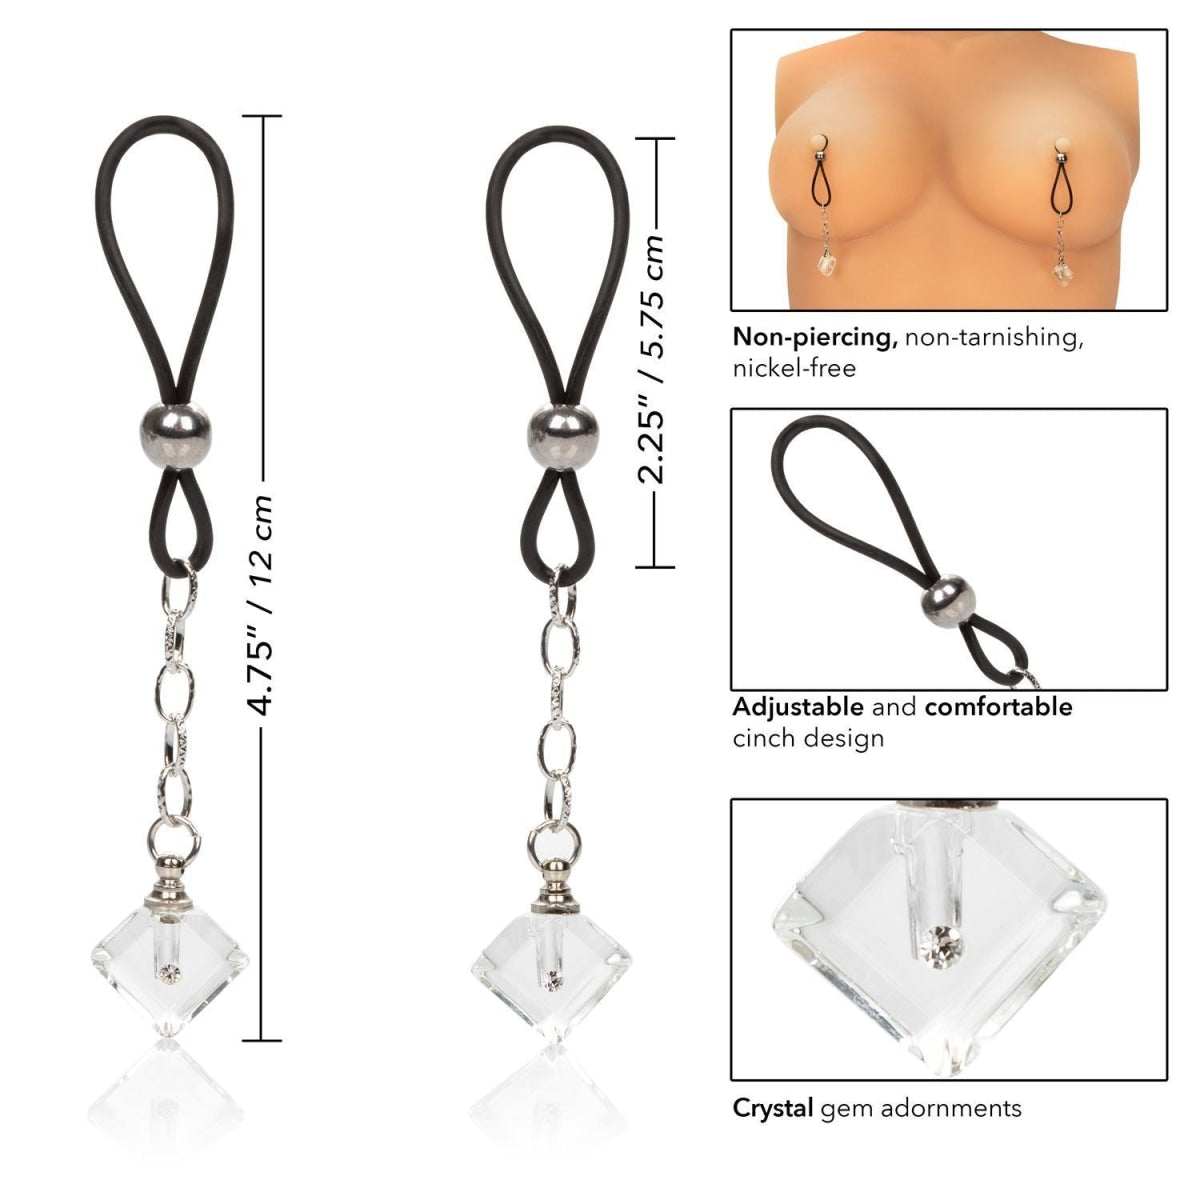 Nipple Play Non Piercing Nipple Jewelry Crystal Gem Intimates Adult Boutique